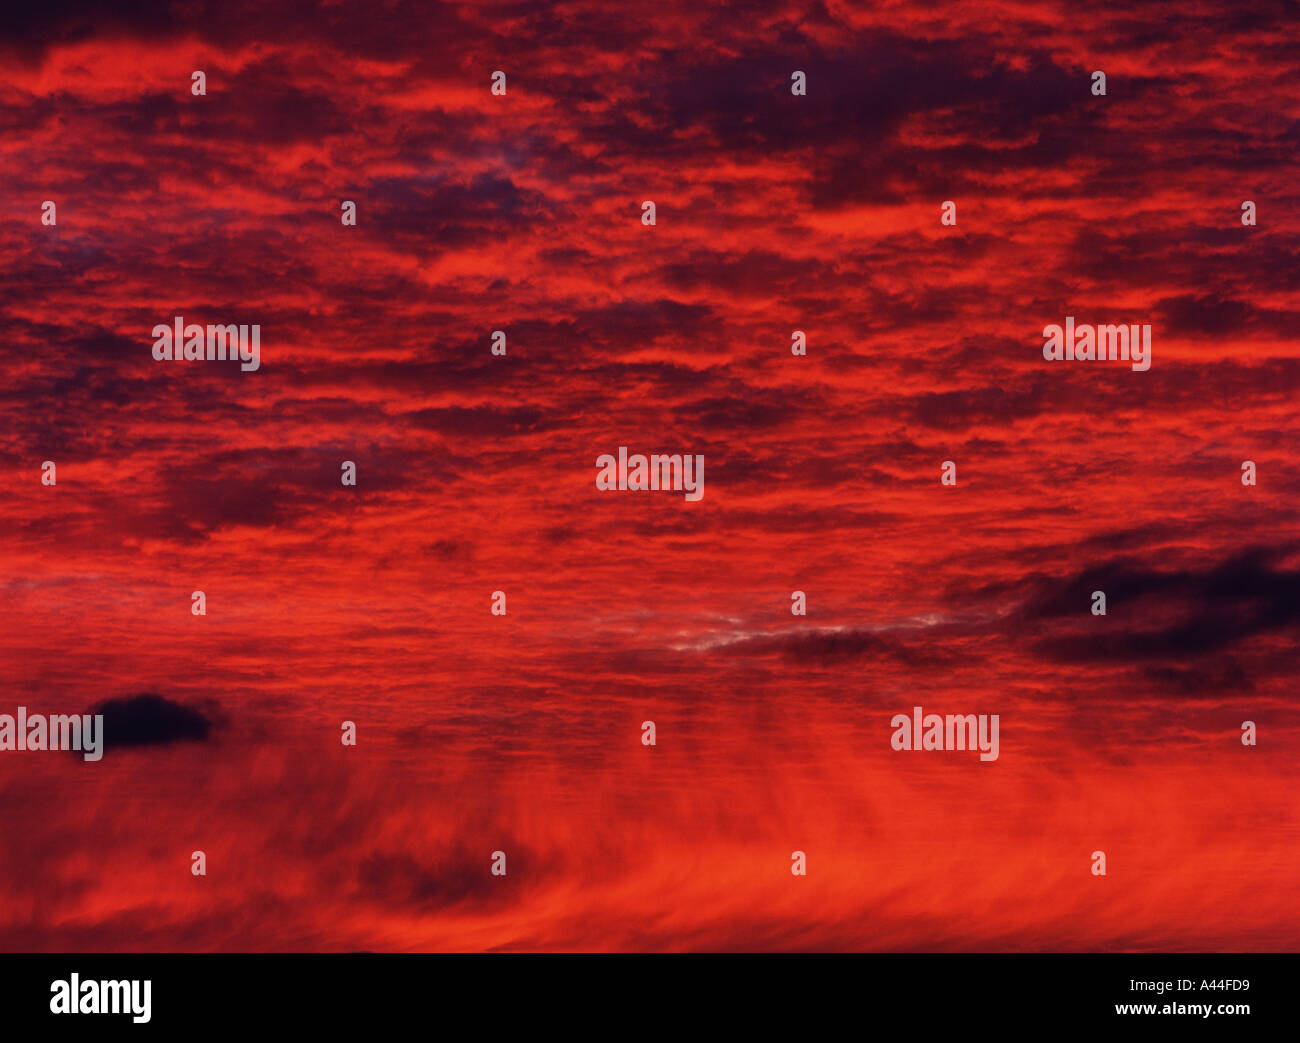 dh Clouds SUNRISE WEATHER Whispy angry stormy red sunrise dawn Orkney sky cloud background dramatic Stock Photo